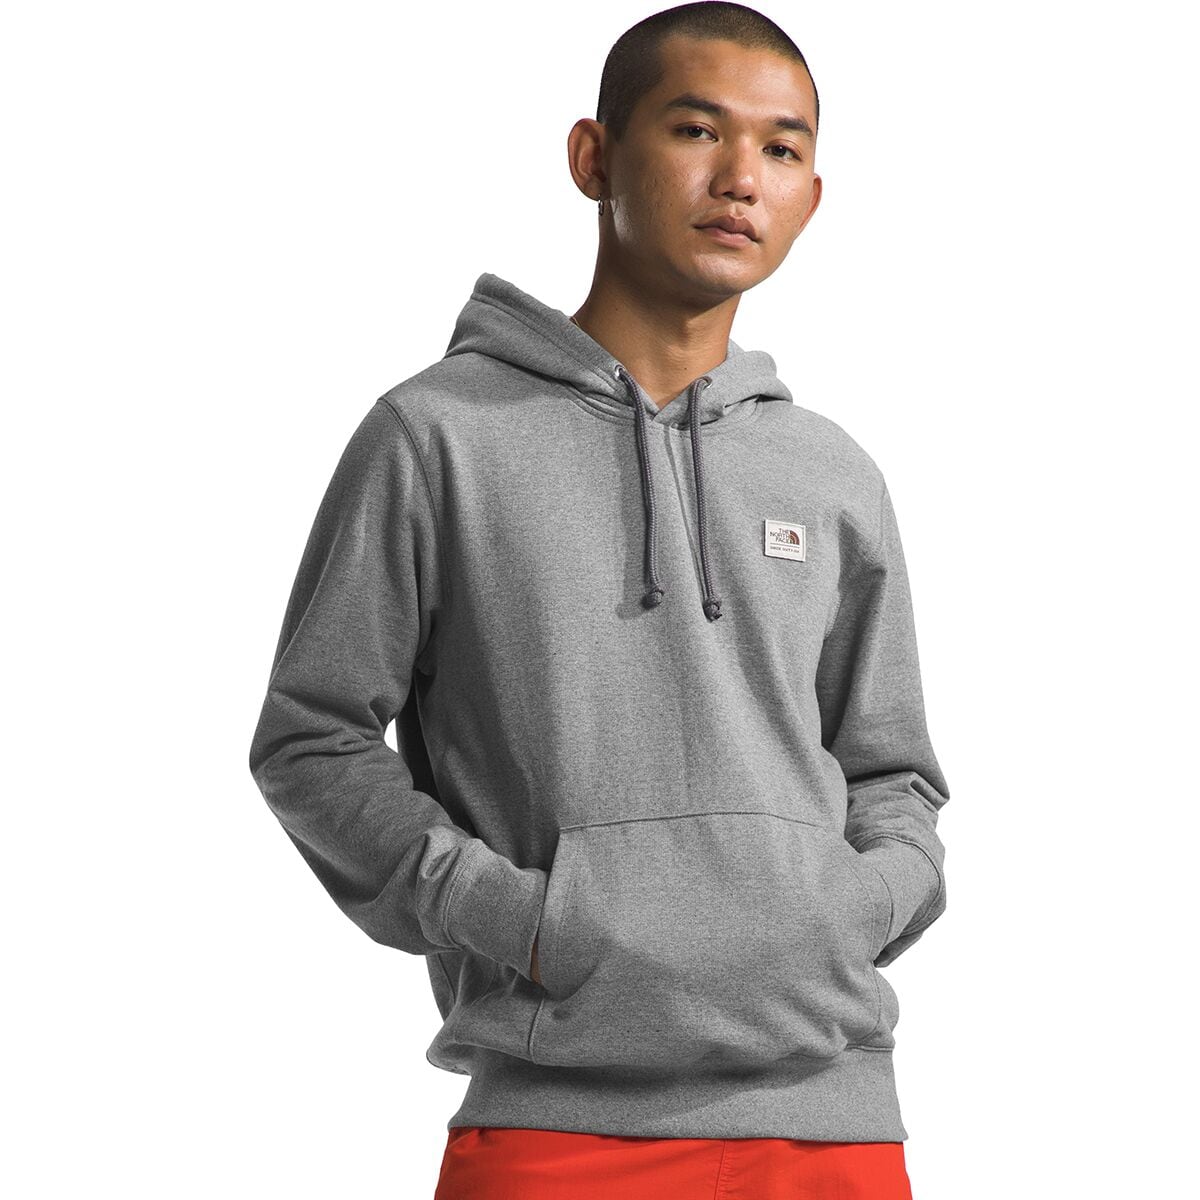 North Face Men's Heritage Patch PO Hoody Grey Heather